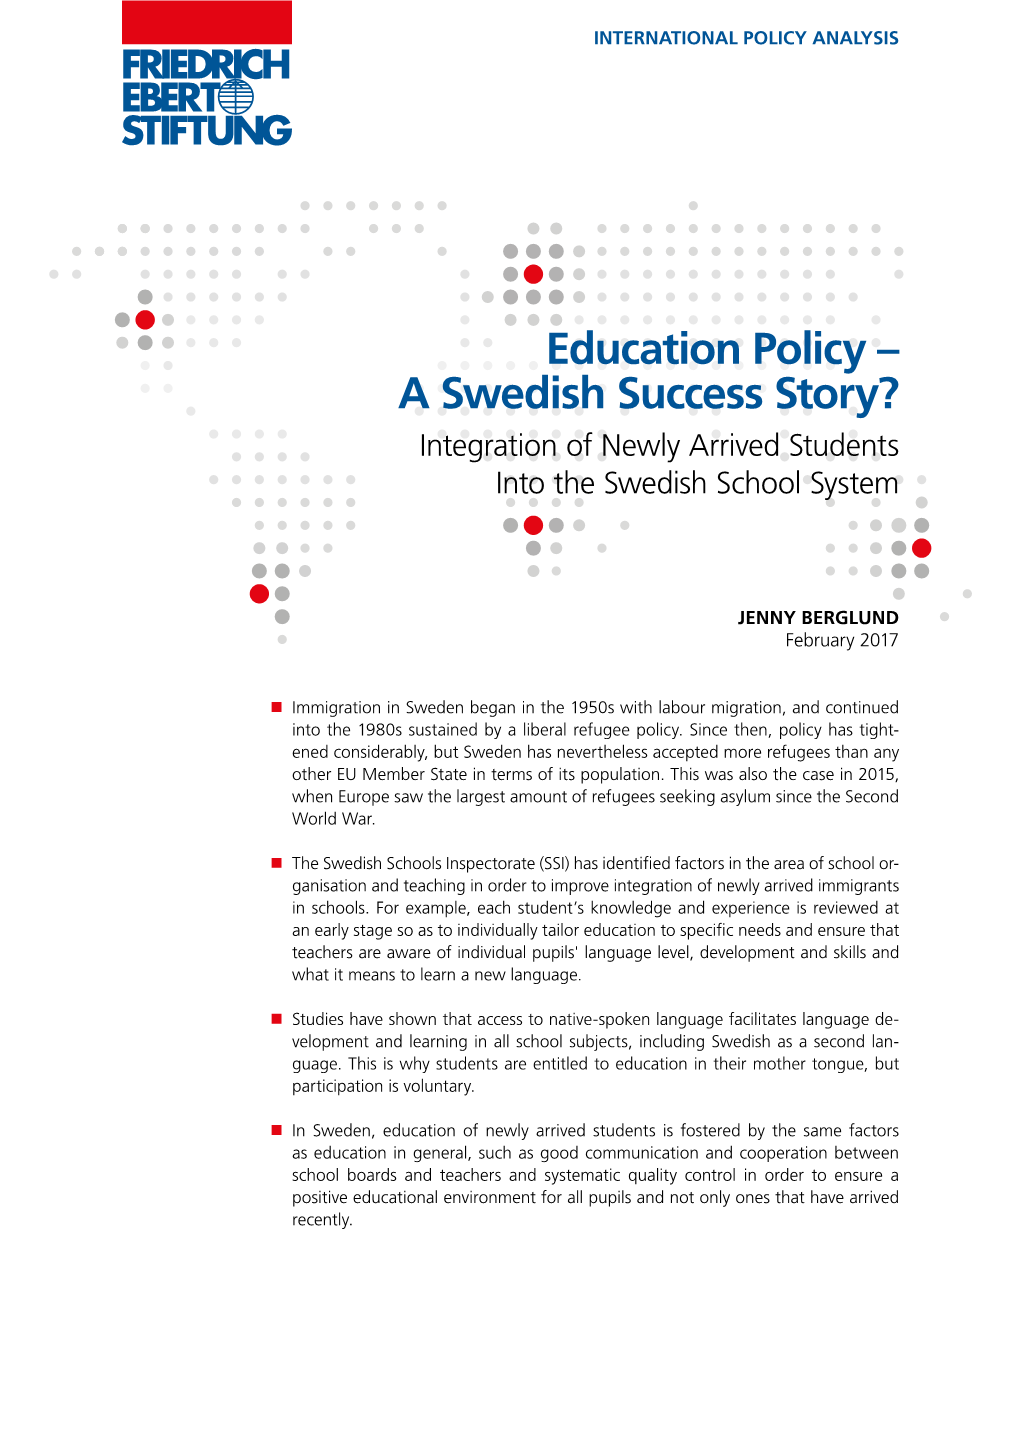 Education Policy – a Swedish Success Story? Integration of Newly Arrived Students Into the Swedish School System